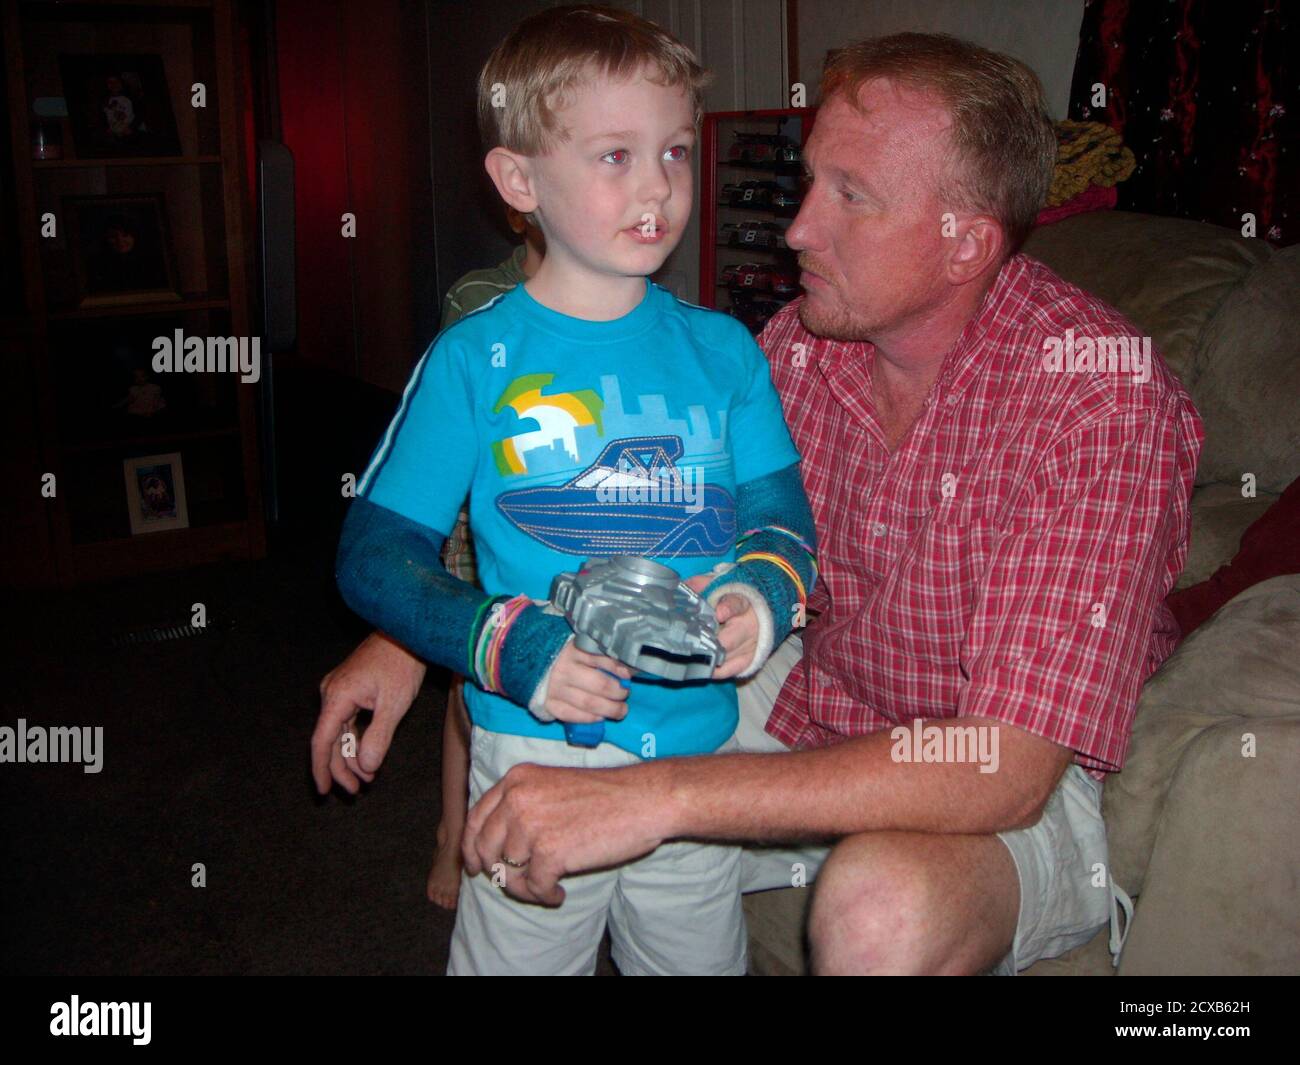 Five-year-old Garrett LeClere and his foster father Jeff McCormick are pictured in Phil Campbell, Alabama, May 24, 2011. Garrett is a son of McCormick's ex-wife who he had taken in after both of Garrett's parents were killed in the tornadoes. Many children lost loved ones in the killer tornadoes that carved up 610 miles of Alabama last month and left 238 dead. Though there is no official state count, a Reuters review of storms victims' obituaries found that at least eight young people were completely orphaned. Picture taken on May 24, 2011.  REUTERS/Verna Gates    (UNITED STATES - Tags: DISAST Stock Photo